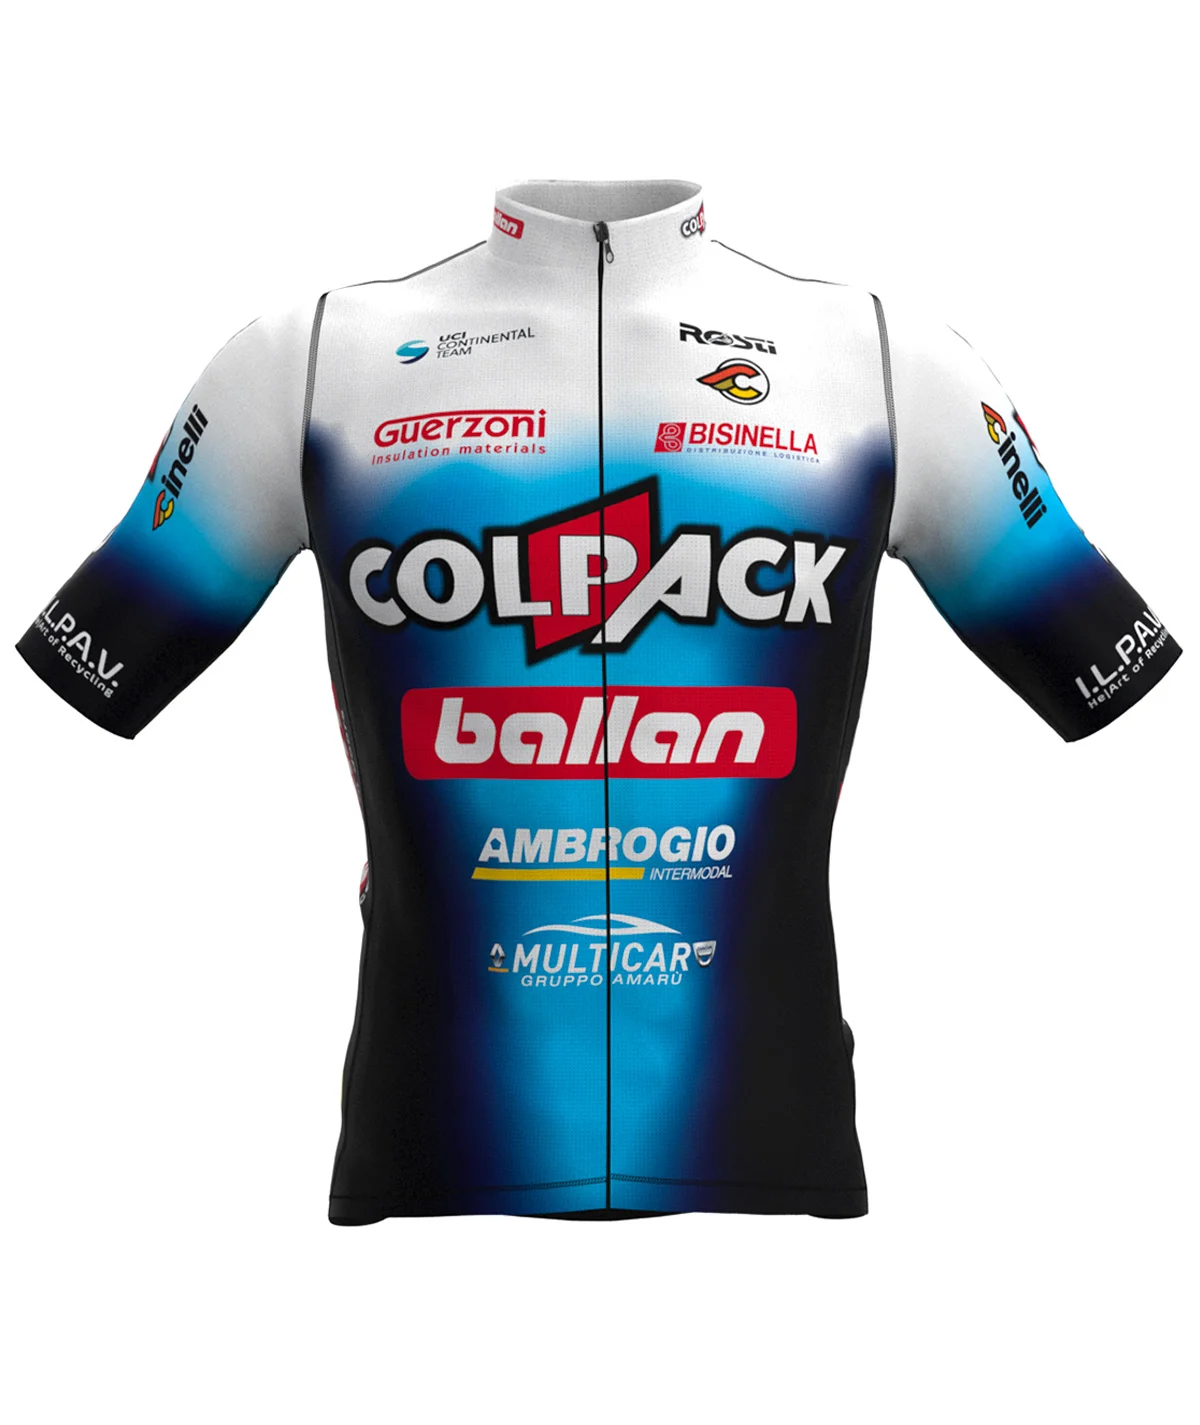 

colpack cycling jersey Men's summer short-sleeved quick-drying and breathable mtb shirt go pro ballan